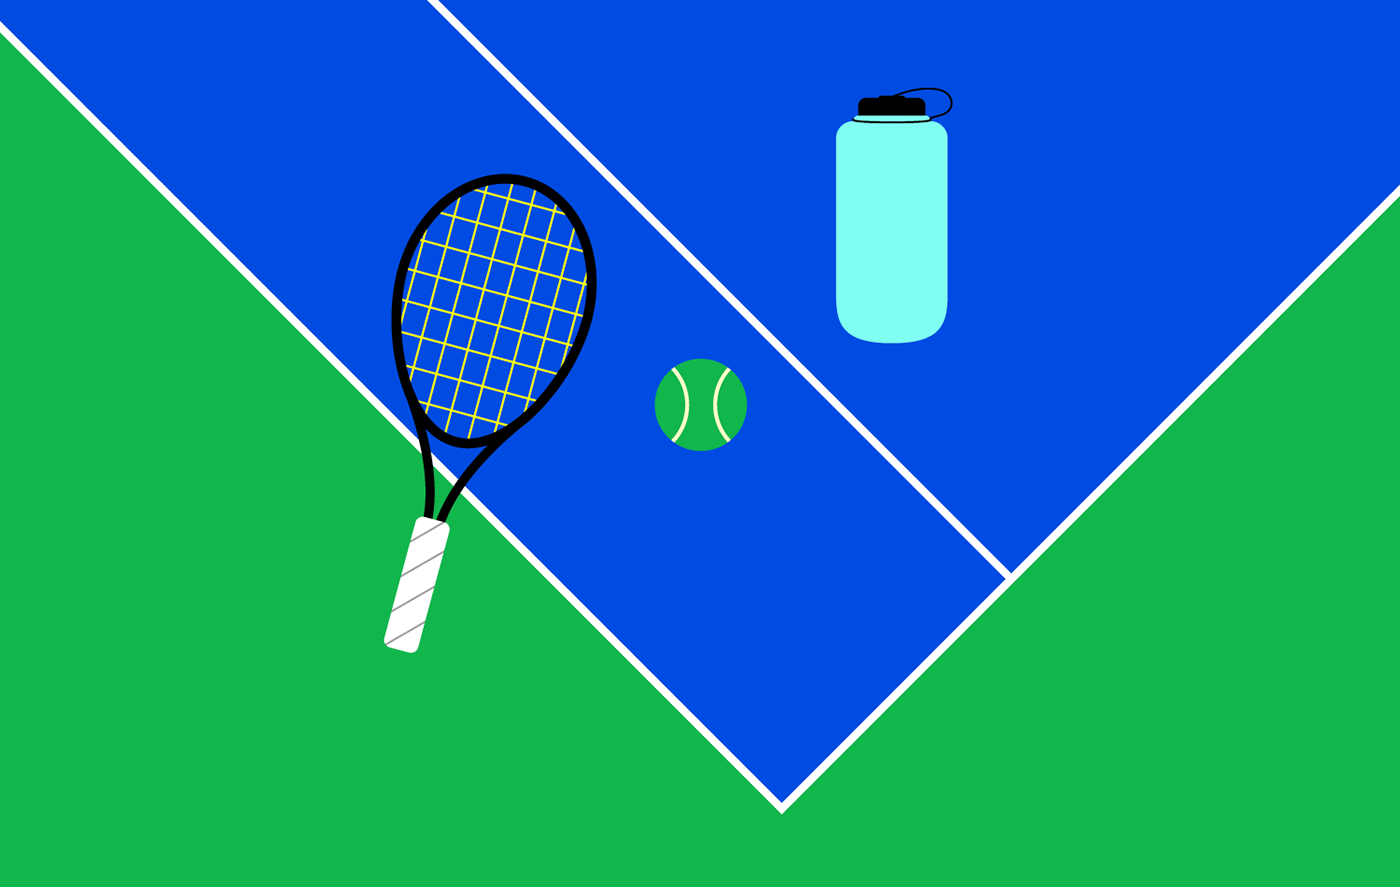 Illustration of tennis ball, racket, and water bottle on the tennis court